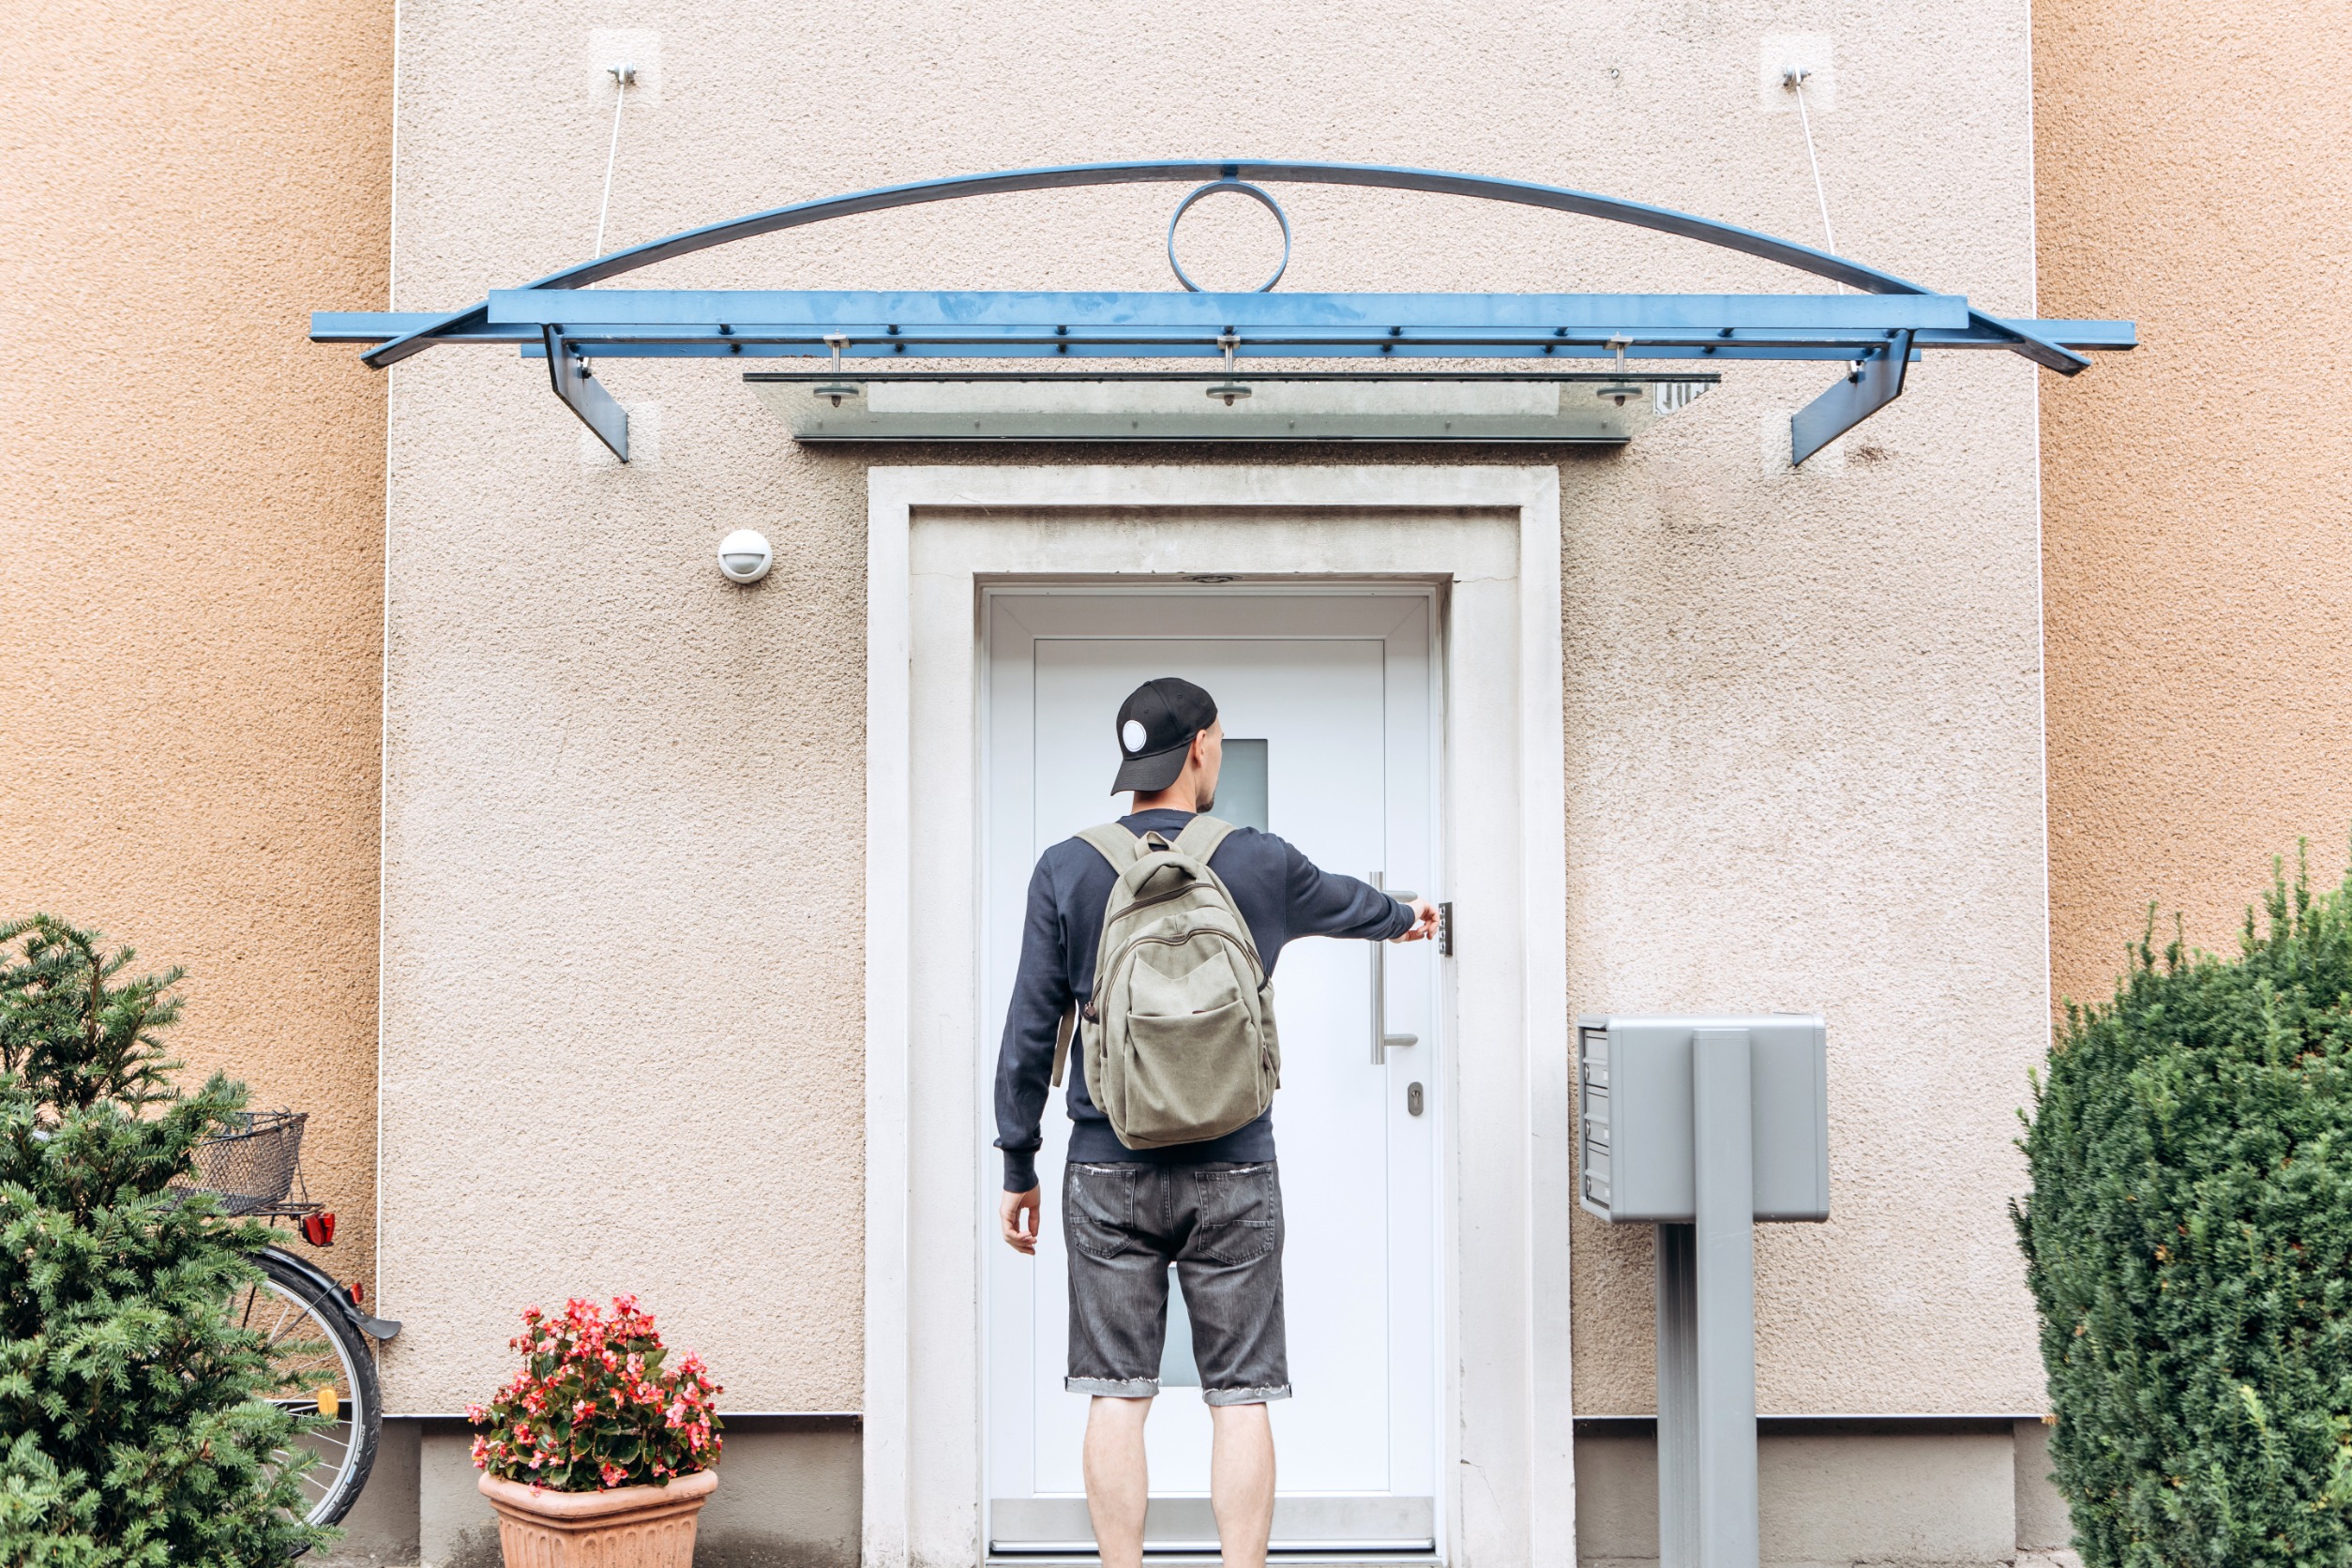 Young man with backpack ringing a doorbell